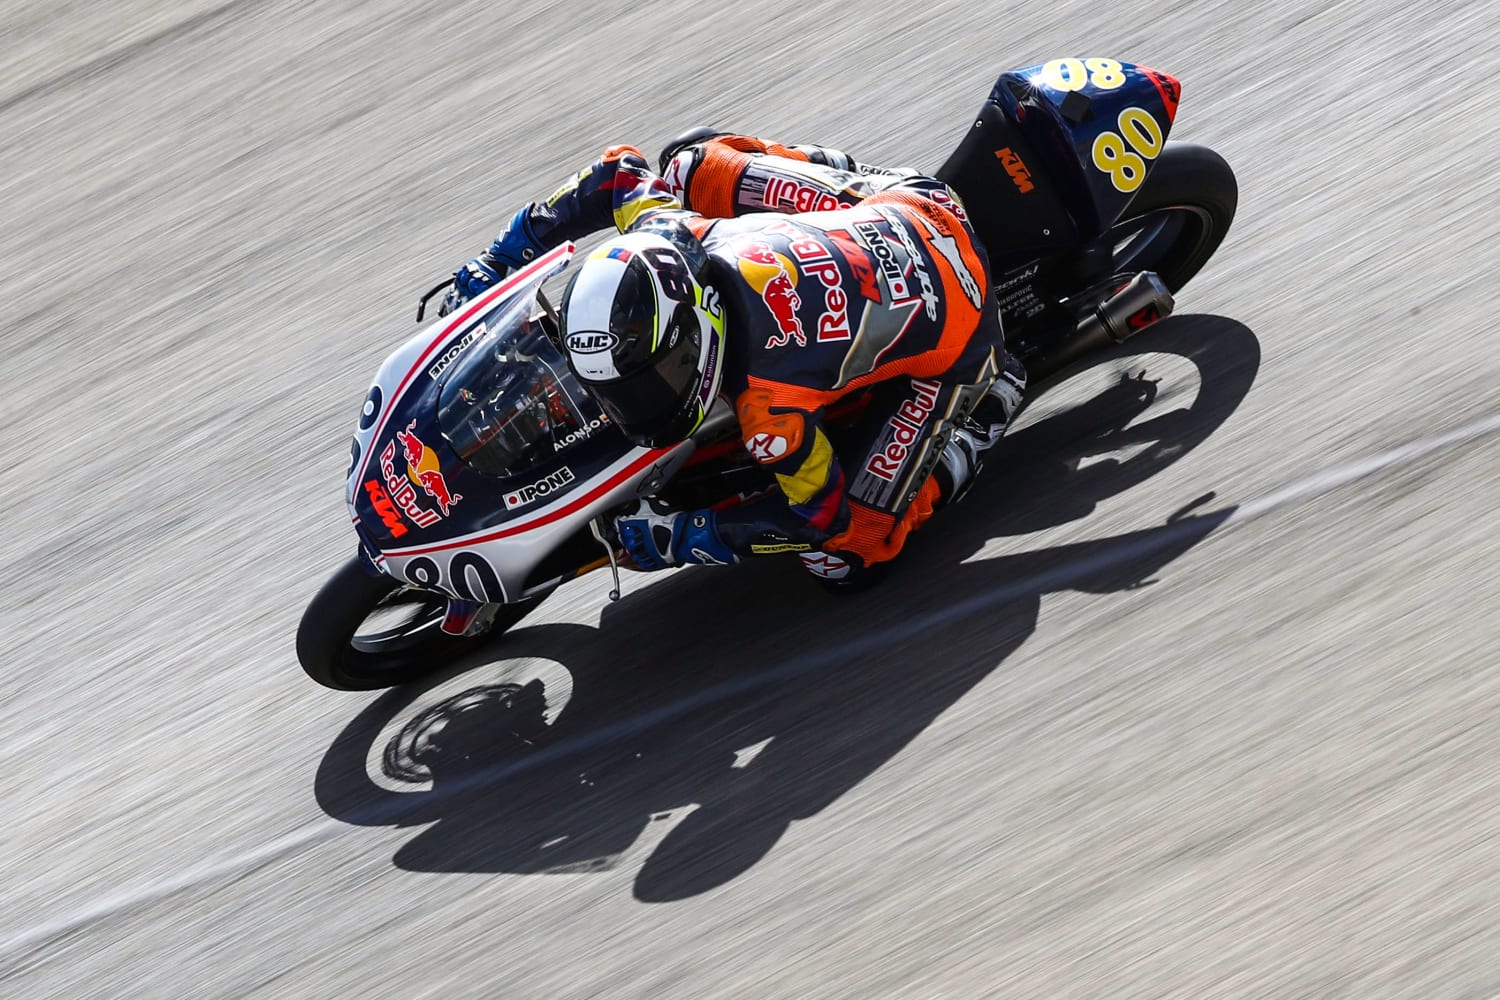 red bull rookies cup live streaming